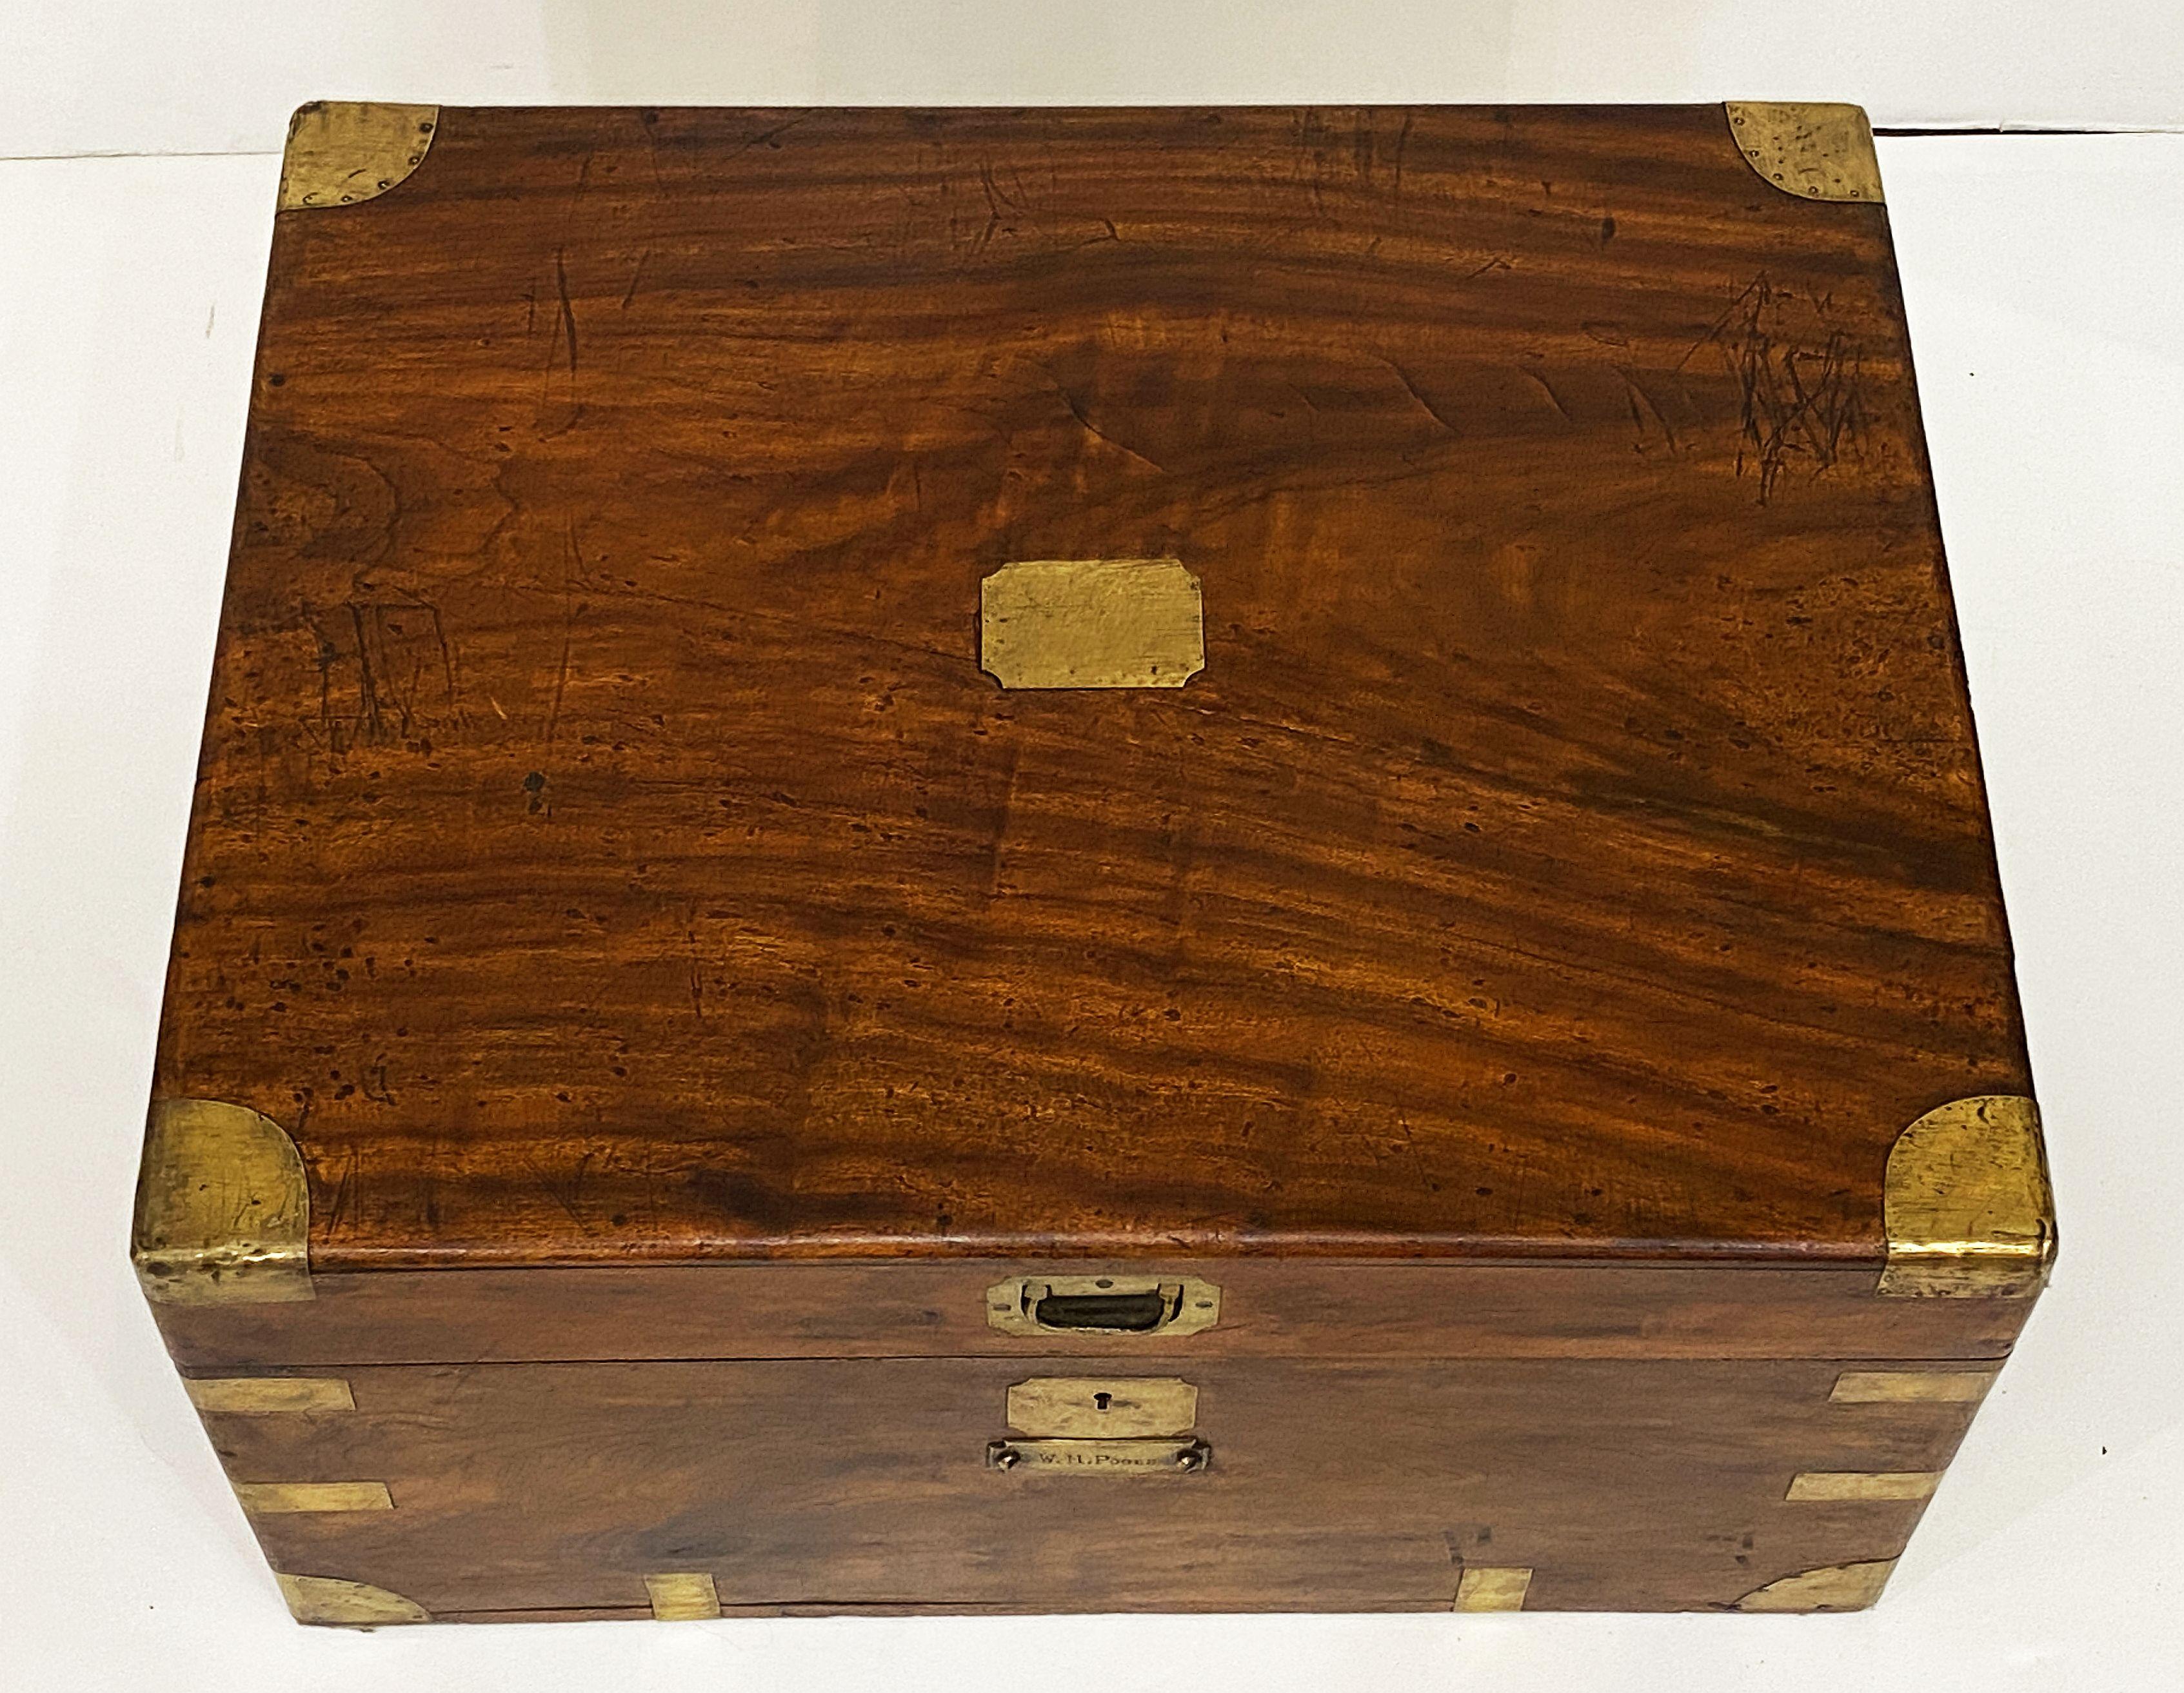 19th Century British Military Officer's Campaign Trunk of Brass-Bound Camphor